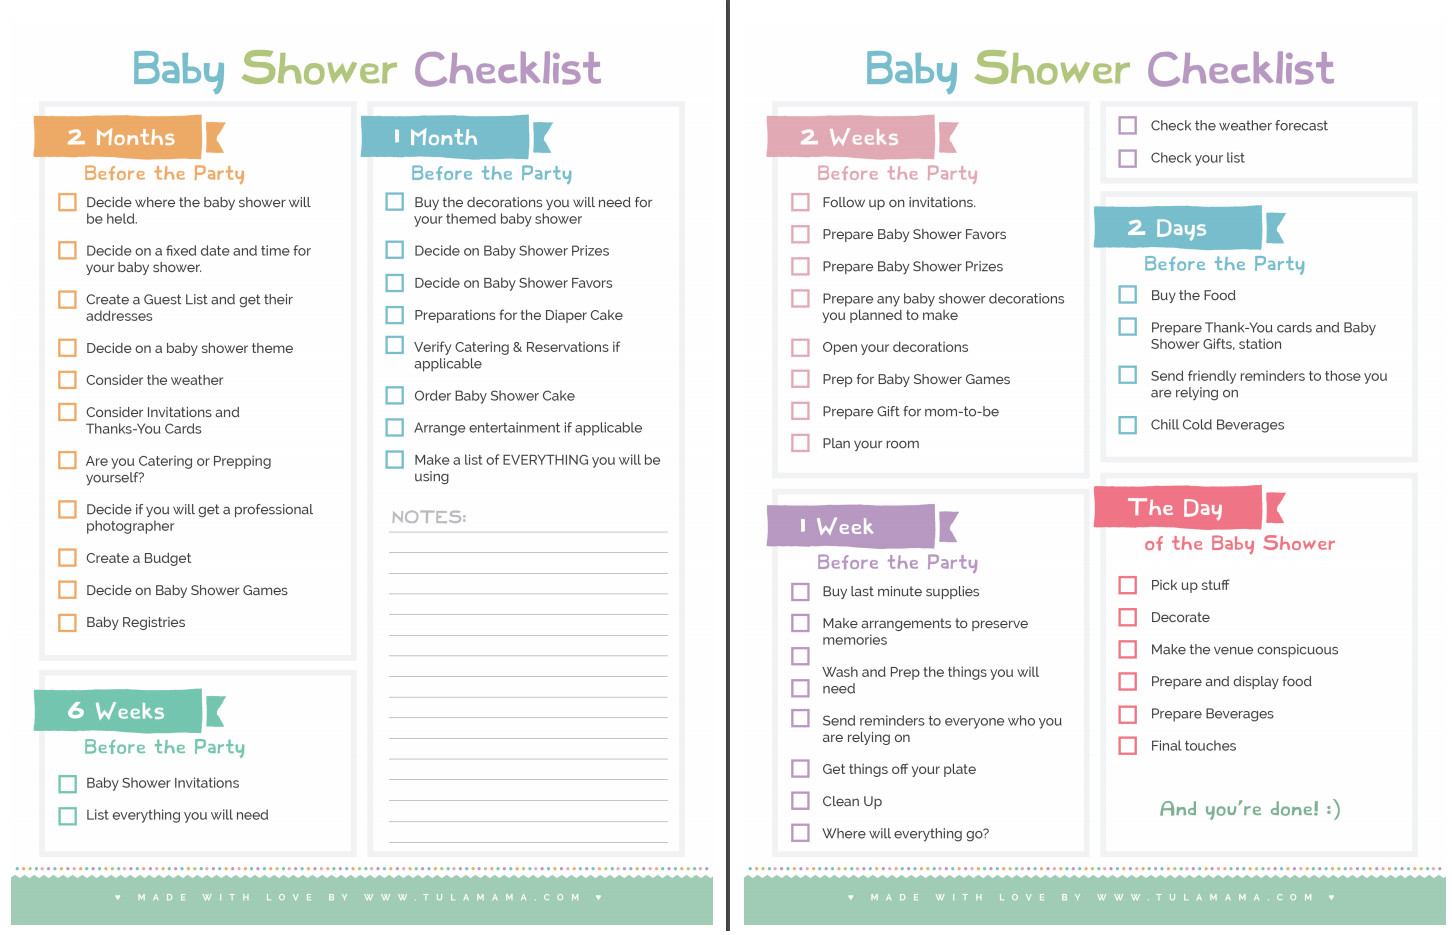 Baby Shower Planning Checklist the Ly Baby Shower Checklist You Will Need Tulamama